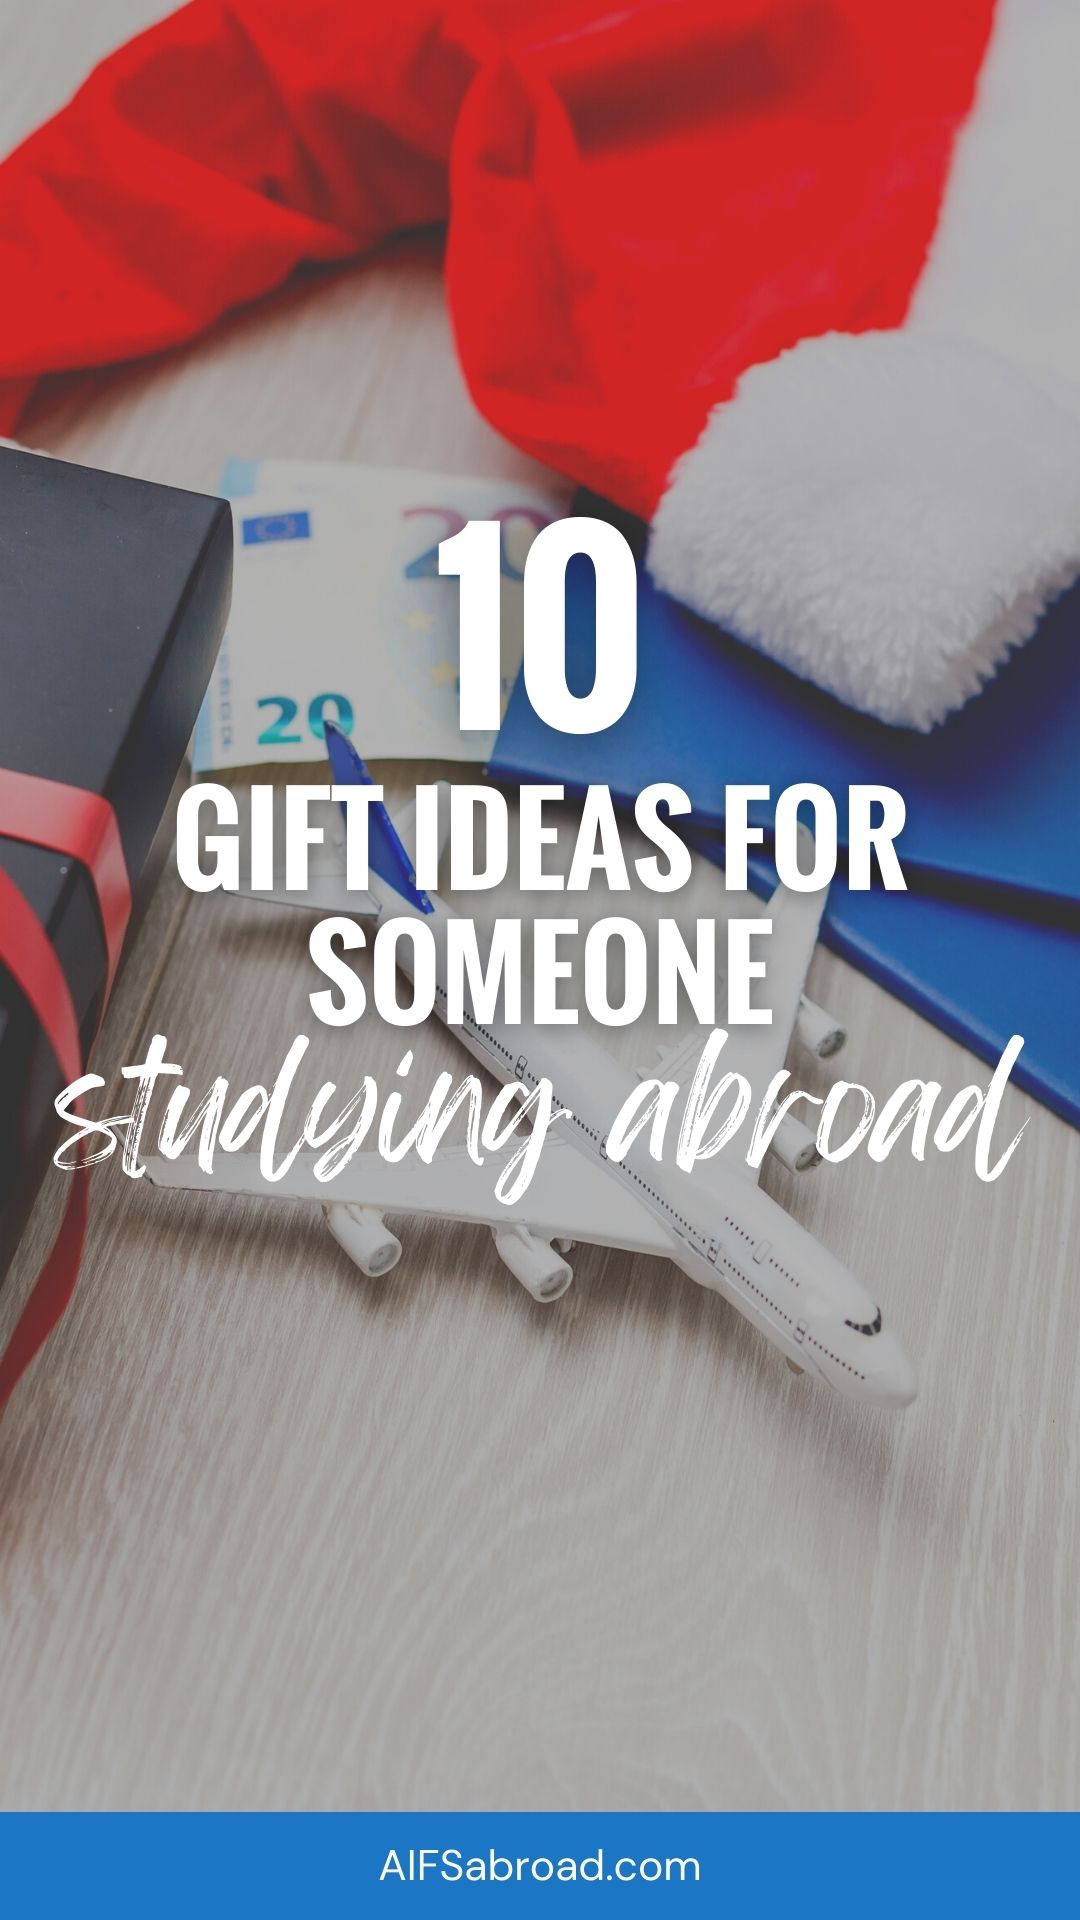 Pin Image: 10 Gift Ideas for Someone Studying Abroad